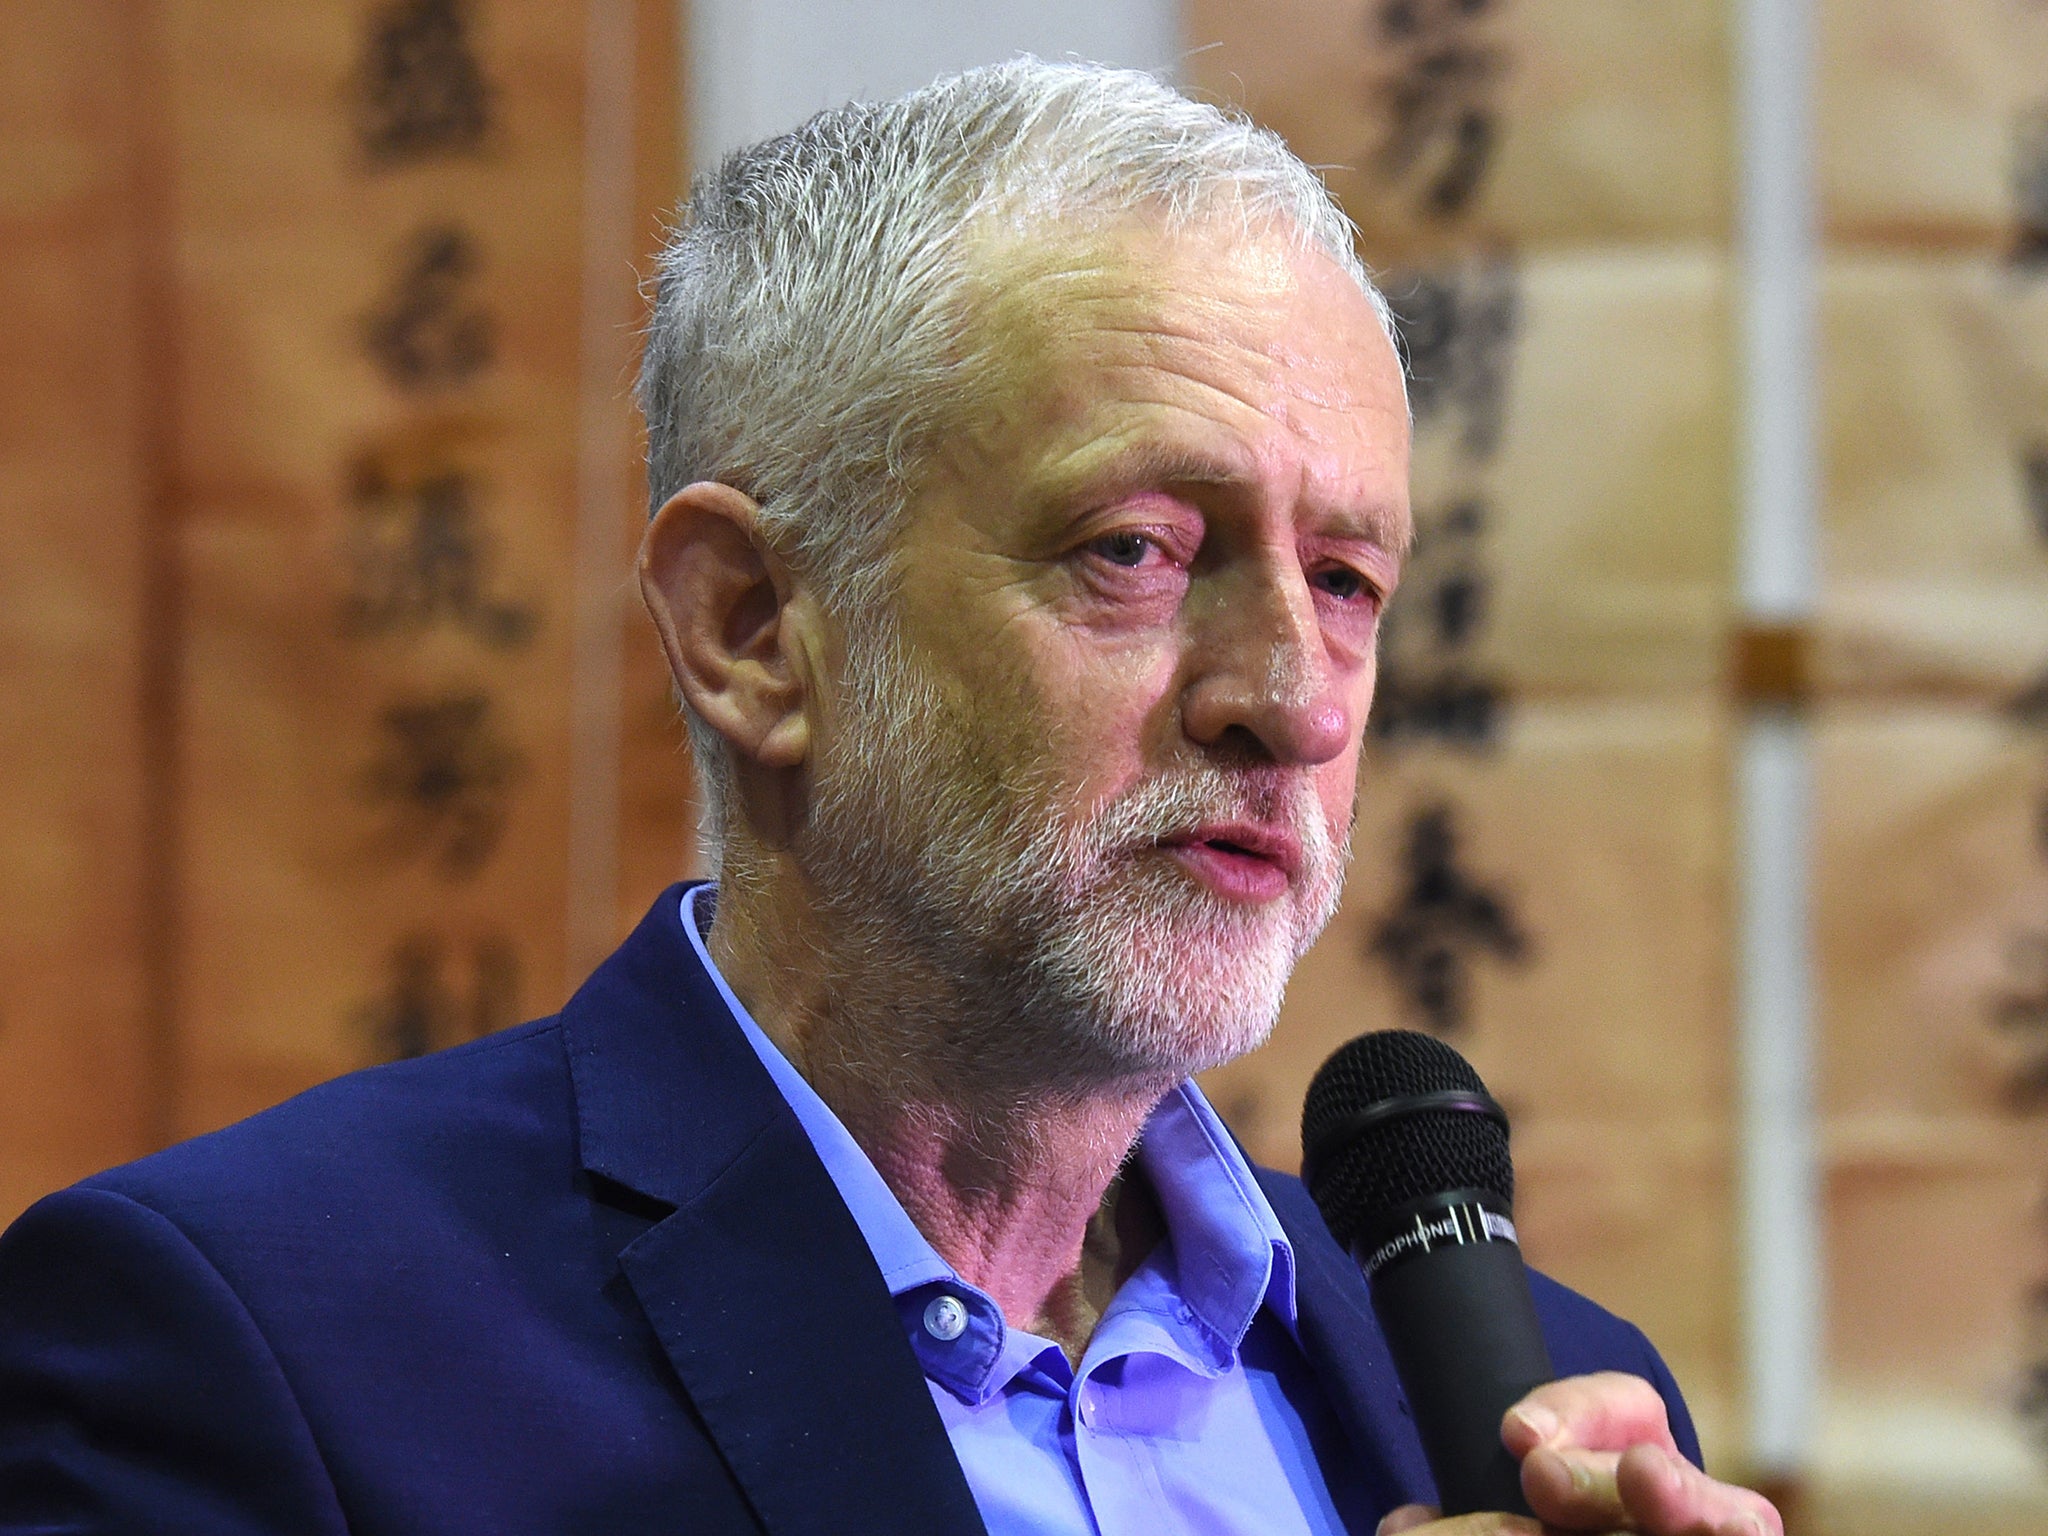 Labour leader Jeremy Corbyn during a community visit to Pagoda Arts in Liverpool